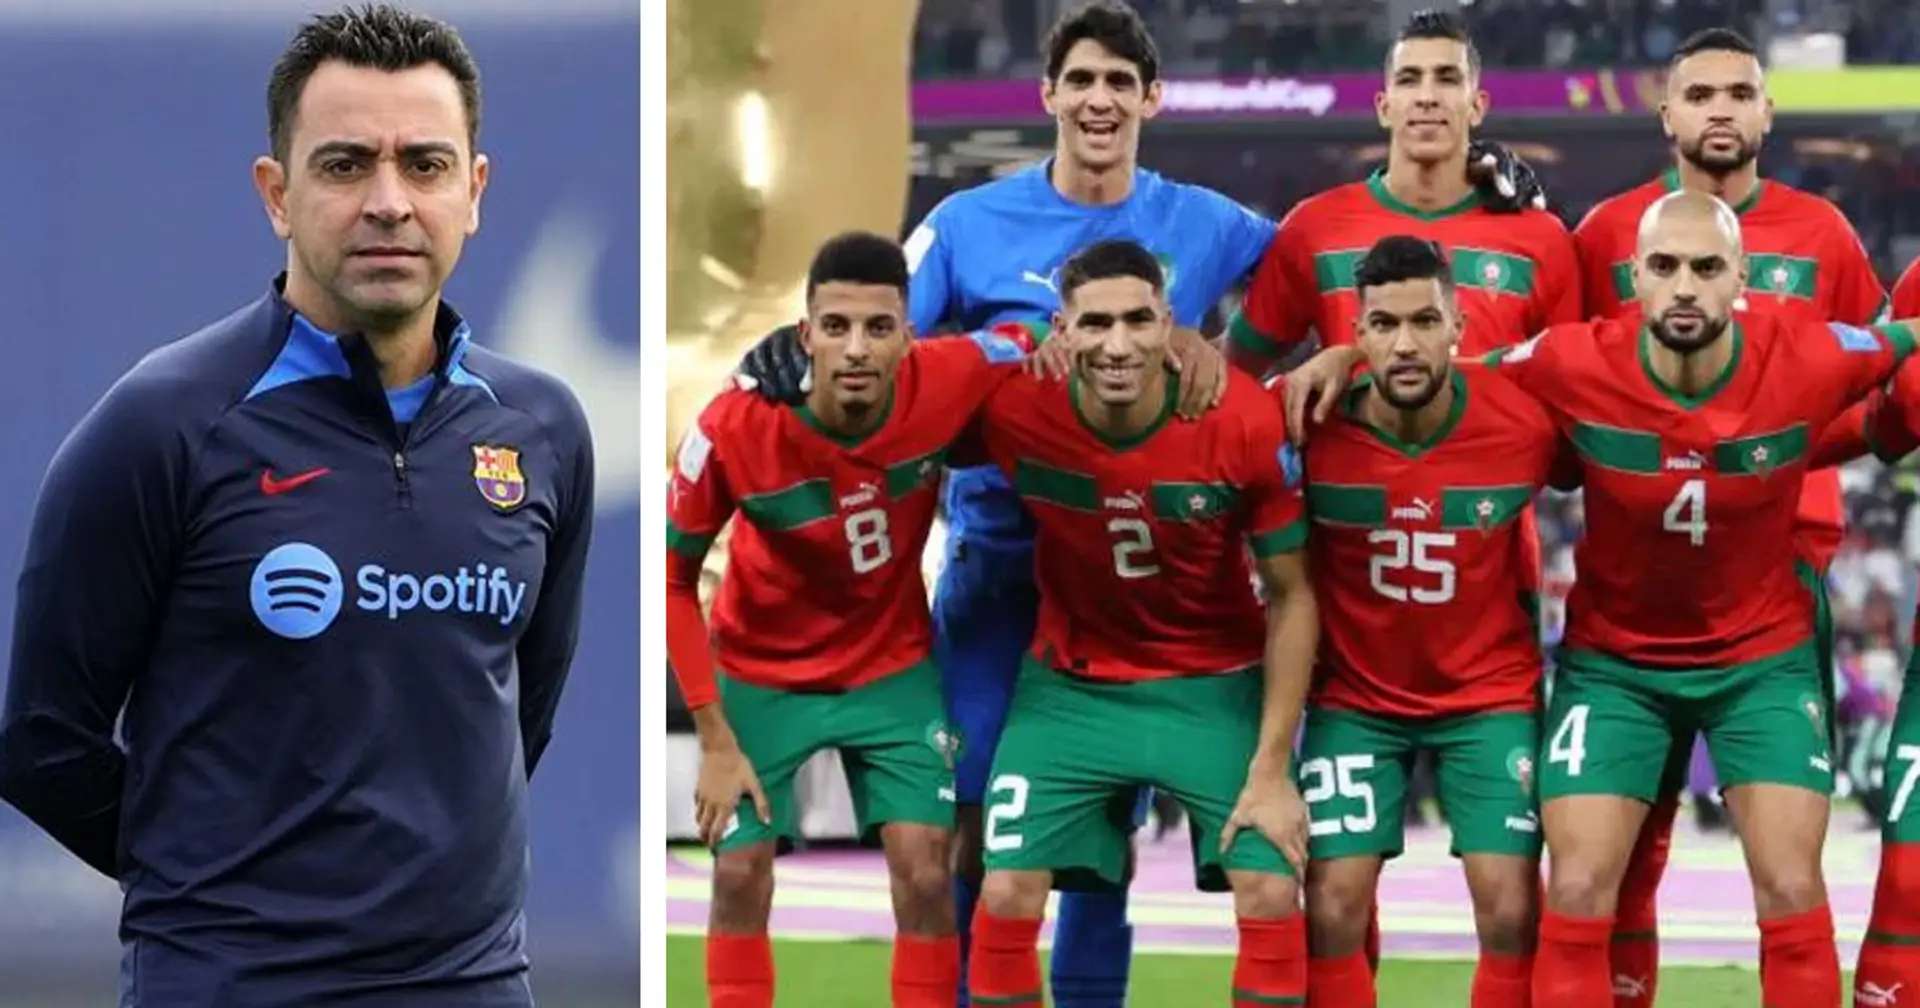 Barcelona linked with Morocco World Cup star & 4 more big stories you might've missed